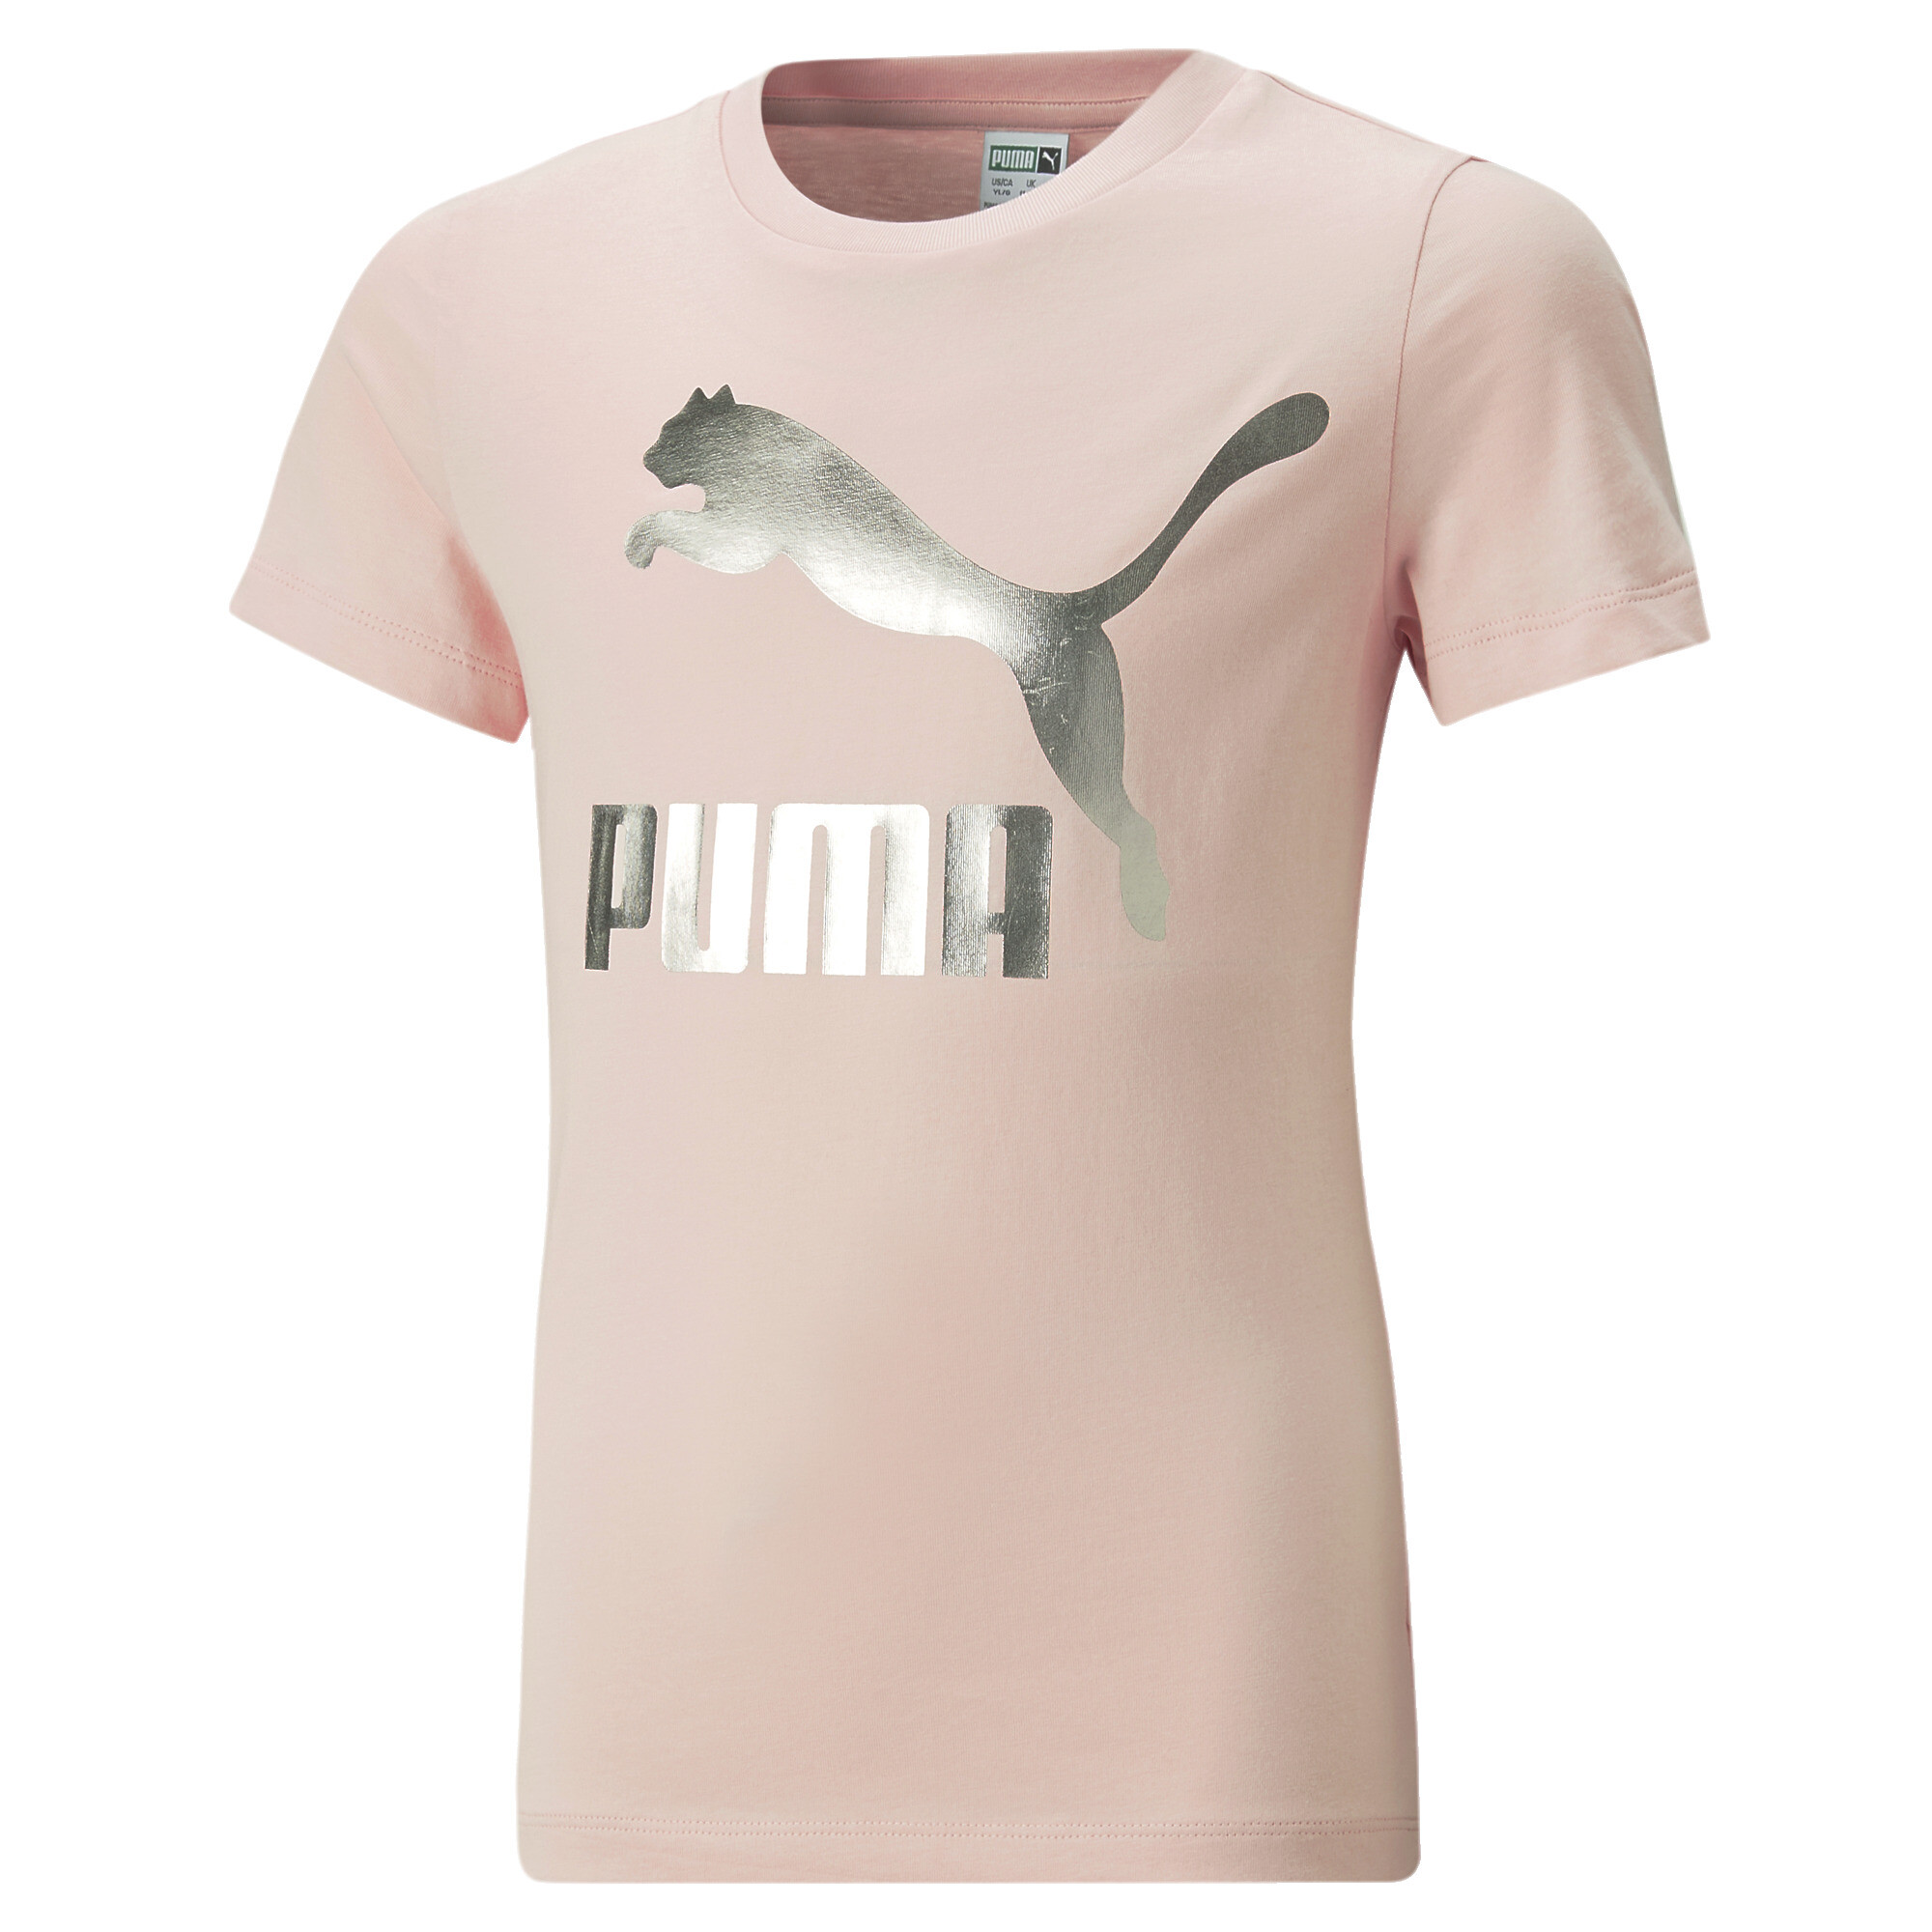 PUMA Classics Logo T-Shirt In Pink, Size 7-8 Youth